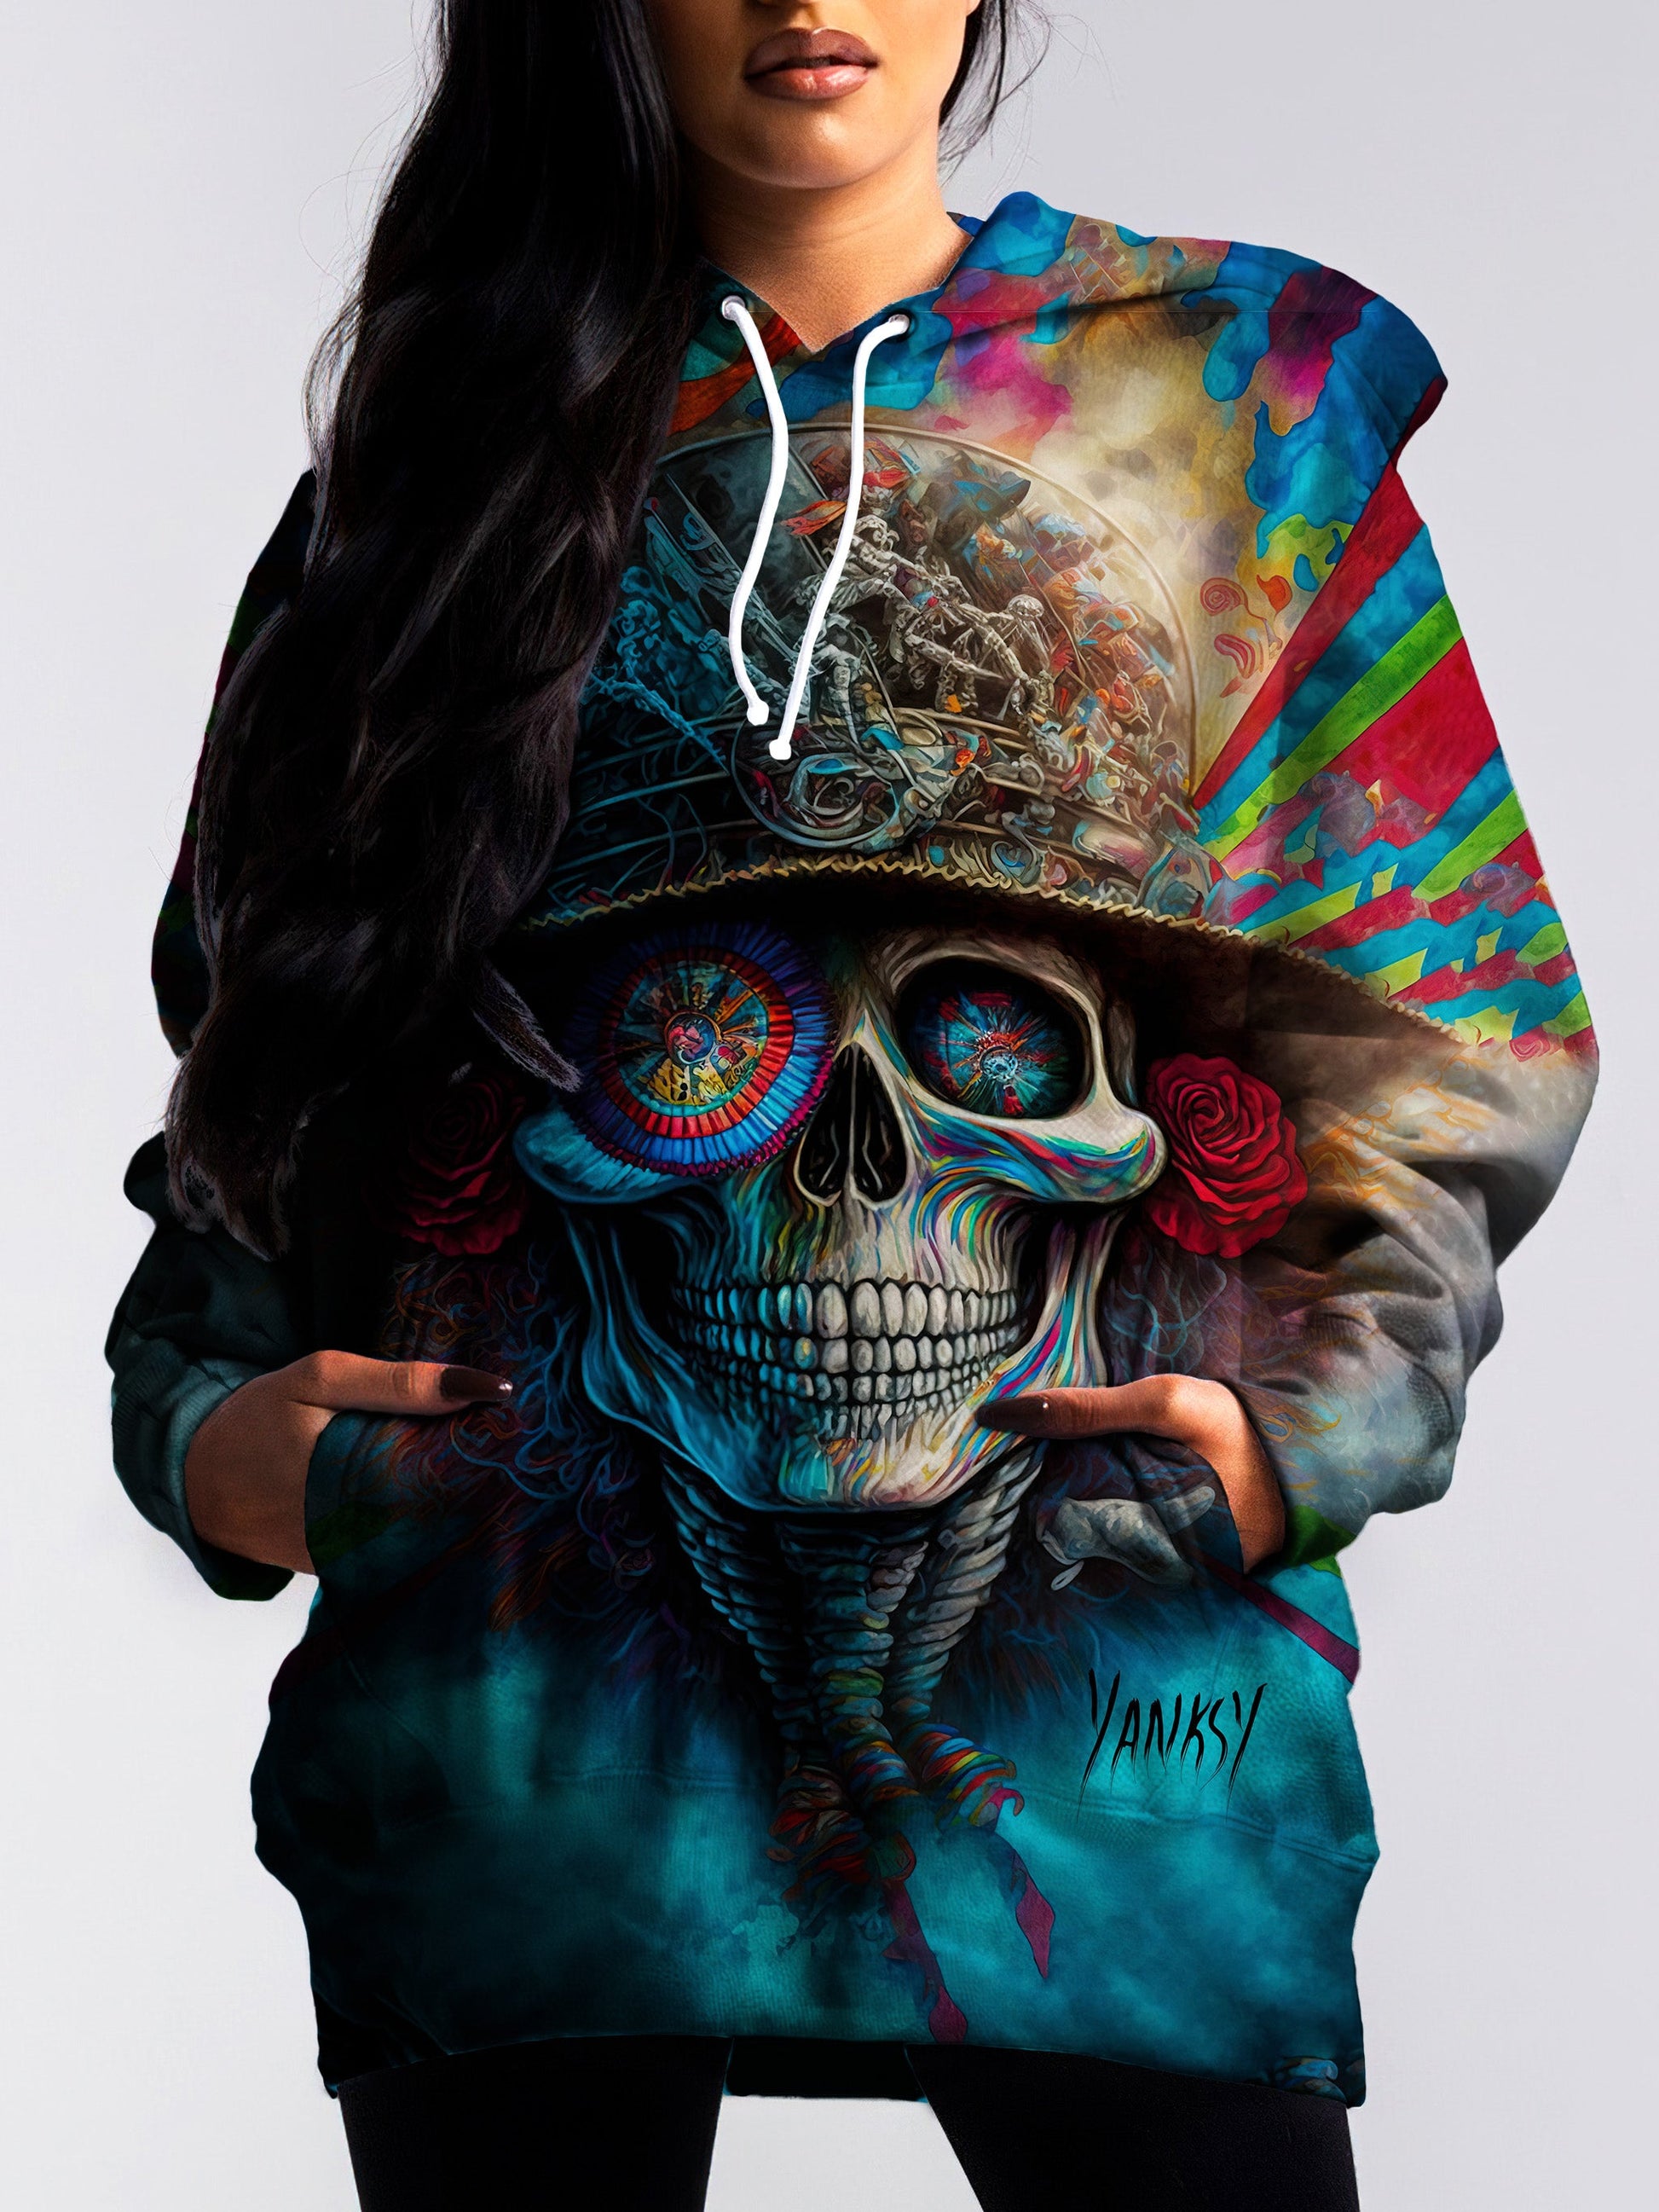 Turn heads wherever you go with this mesmerizing trippy pullover hoodie